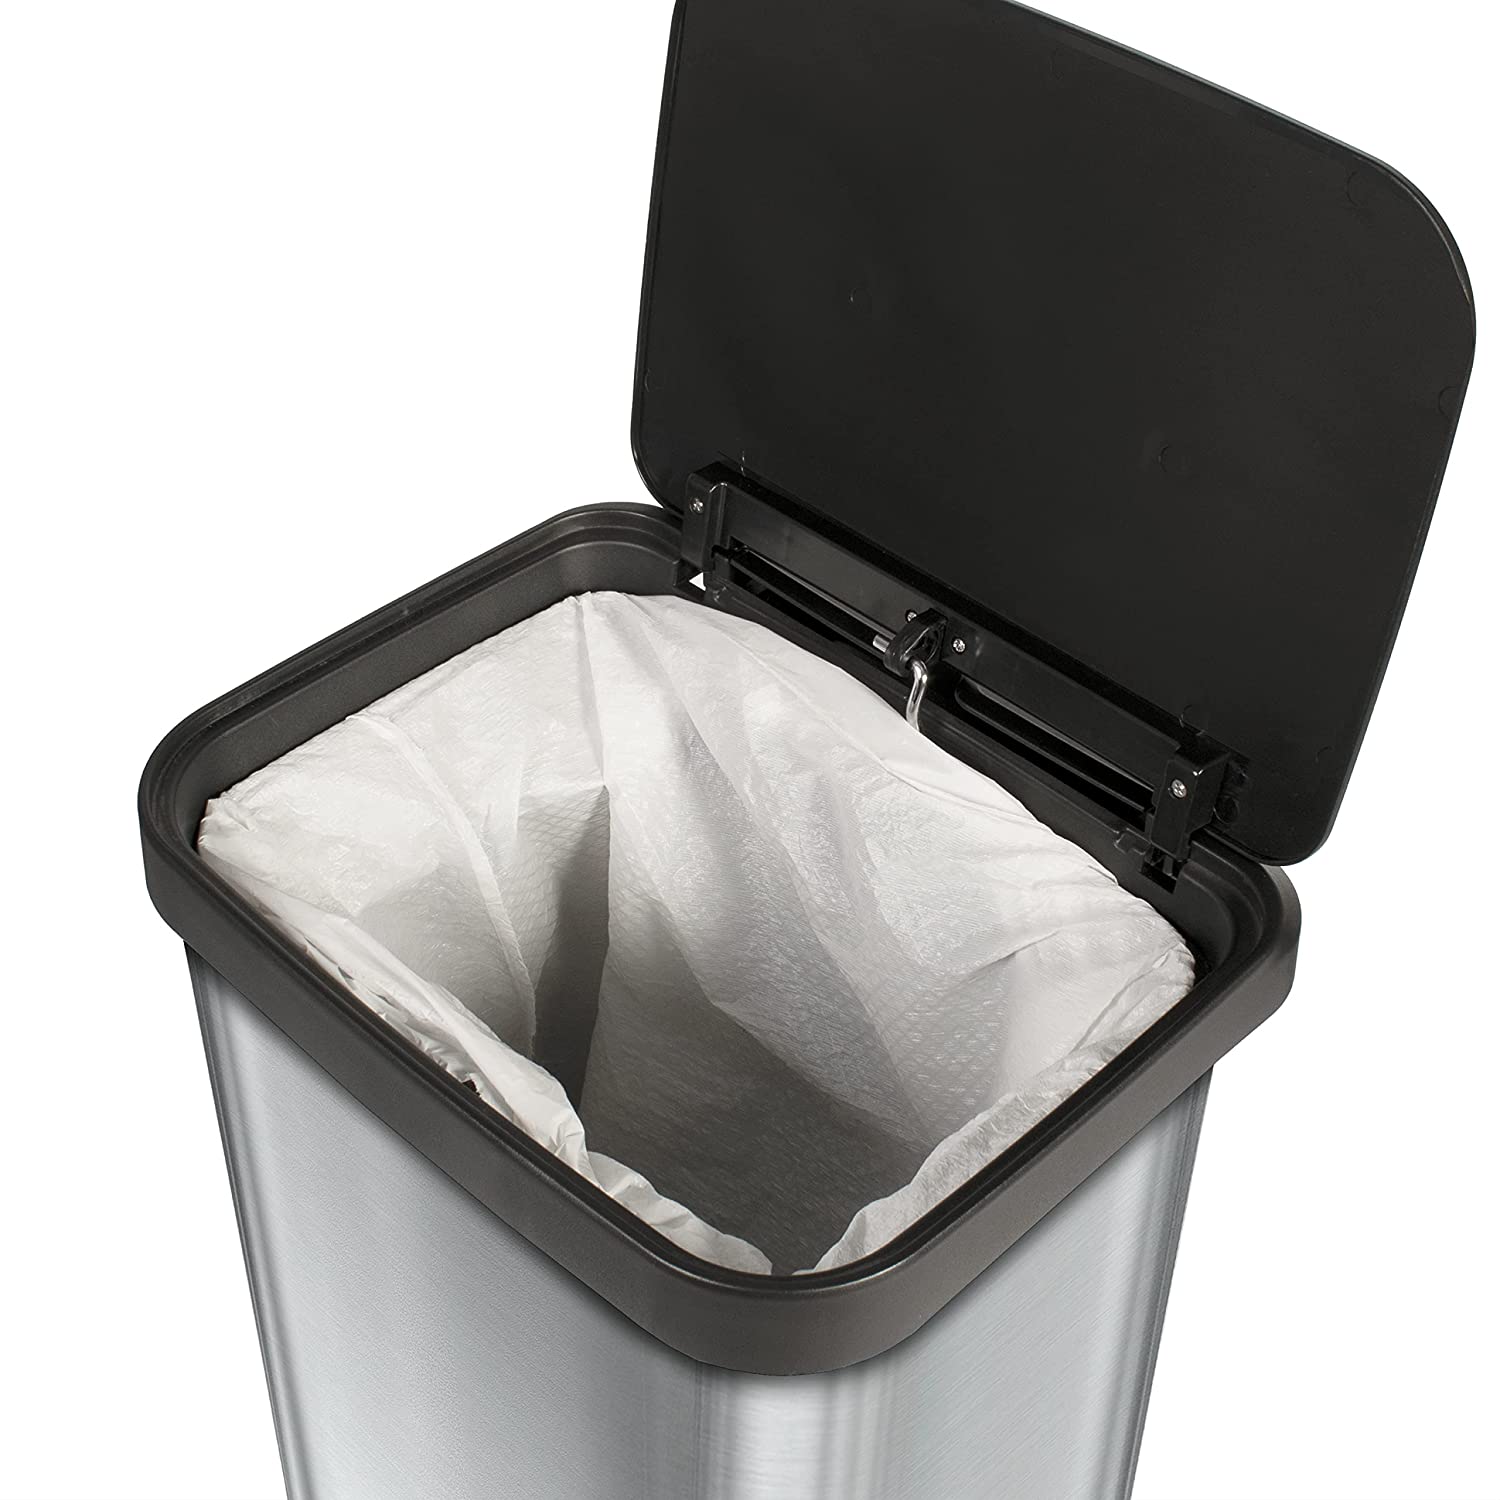 https://bigbigmart.com/wp-content/uploads/2023/05/Glad-GLD-74506-Stainless-Steel-Step-Trash-Can-with-Clorox-Odor-Protection-Large-Metal-Kitchen-Garbage-Bin-with-Soft-Close-Lid-Foot-Pedal-and-Waste-Bag-Roll-Holder-13-Gallon-Stainless9.jpg